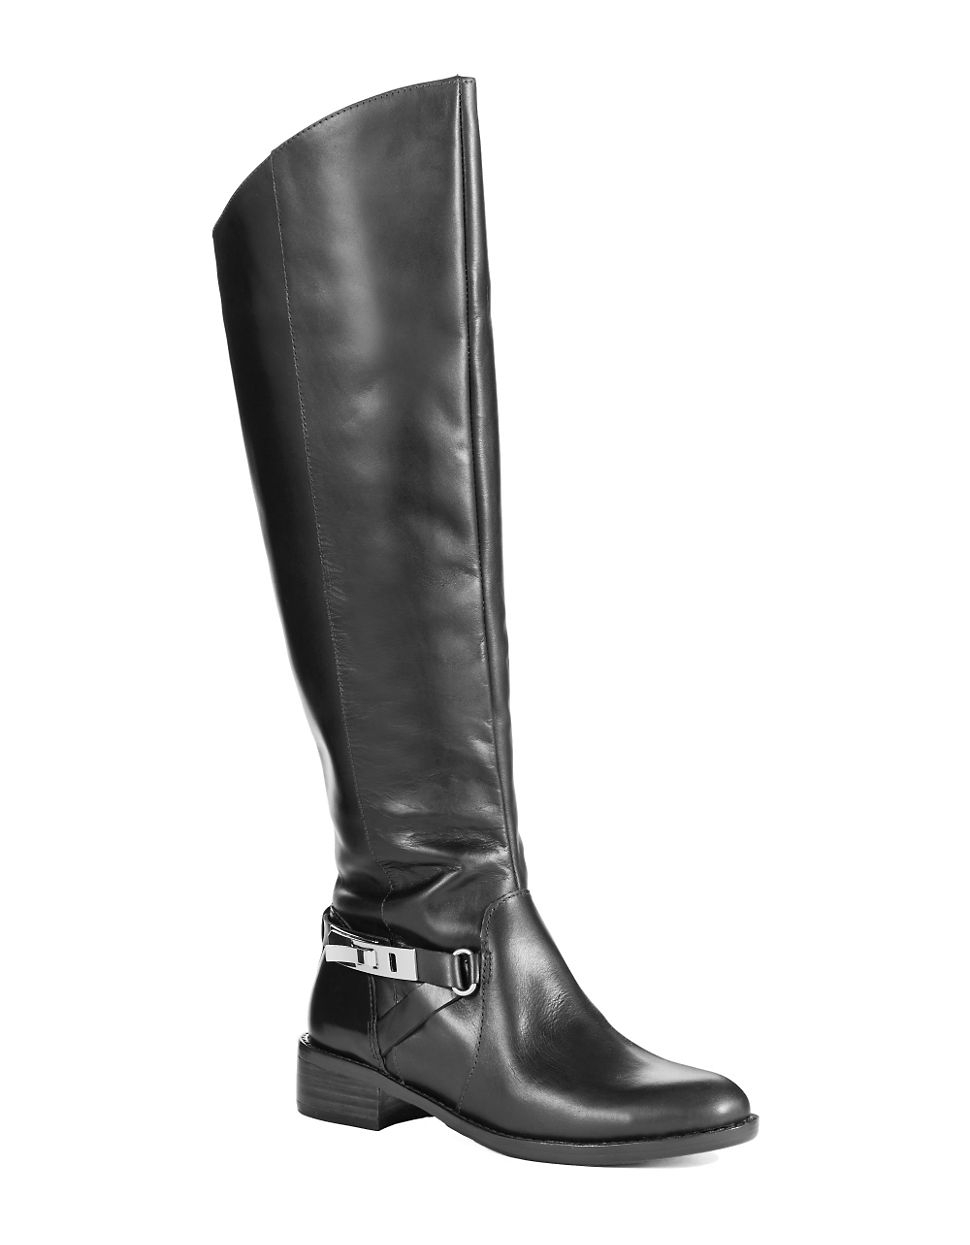 French Connection Yolanda Riding Boots in Black | Lyst